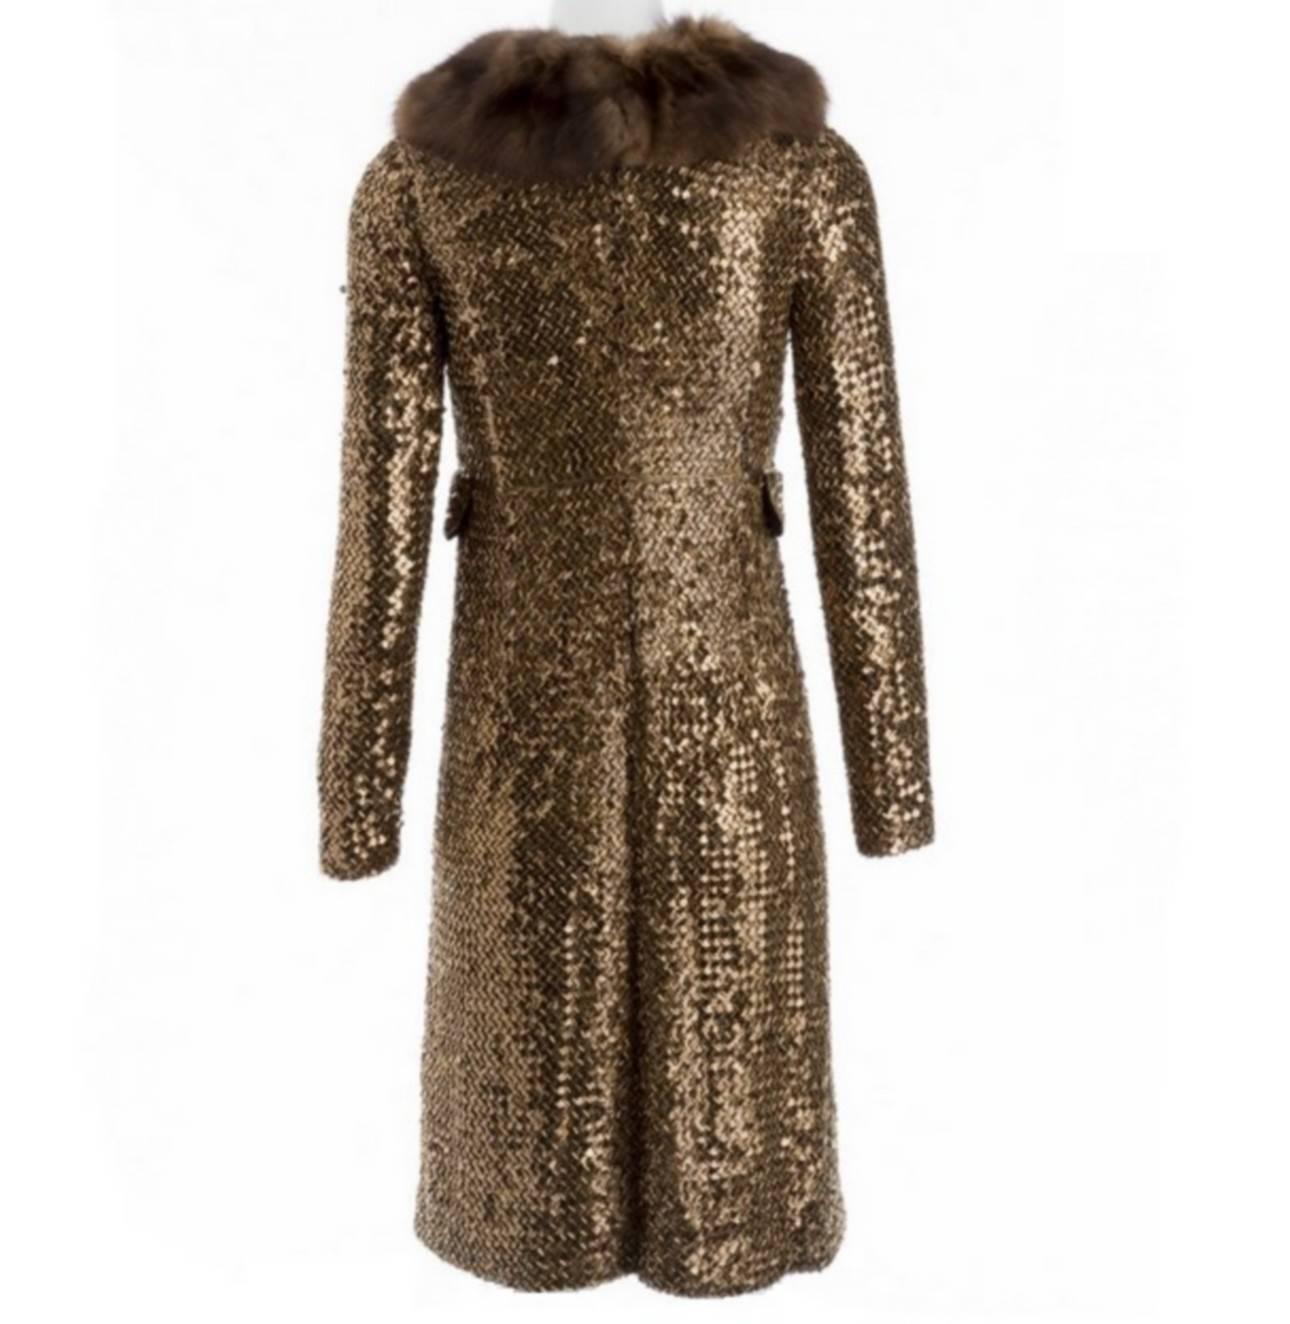 Limited Edition Collection Spécial Pièce
Amazing for your event and Chrismas days
Its comes with 2 removable collars 
Black and Brown
Black velvet coat lining
Excellente condition
Note for this coat : No compositon tag inside
Size  38 IT / French